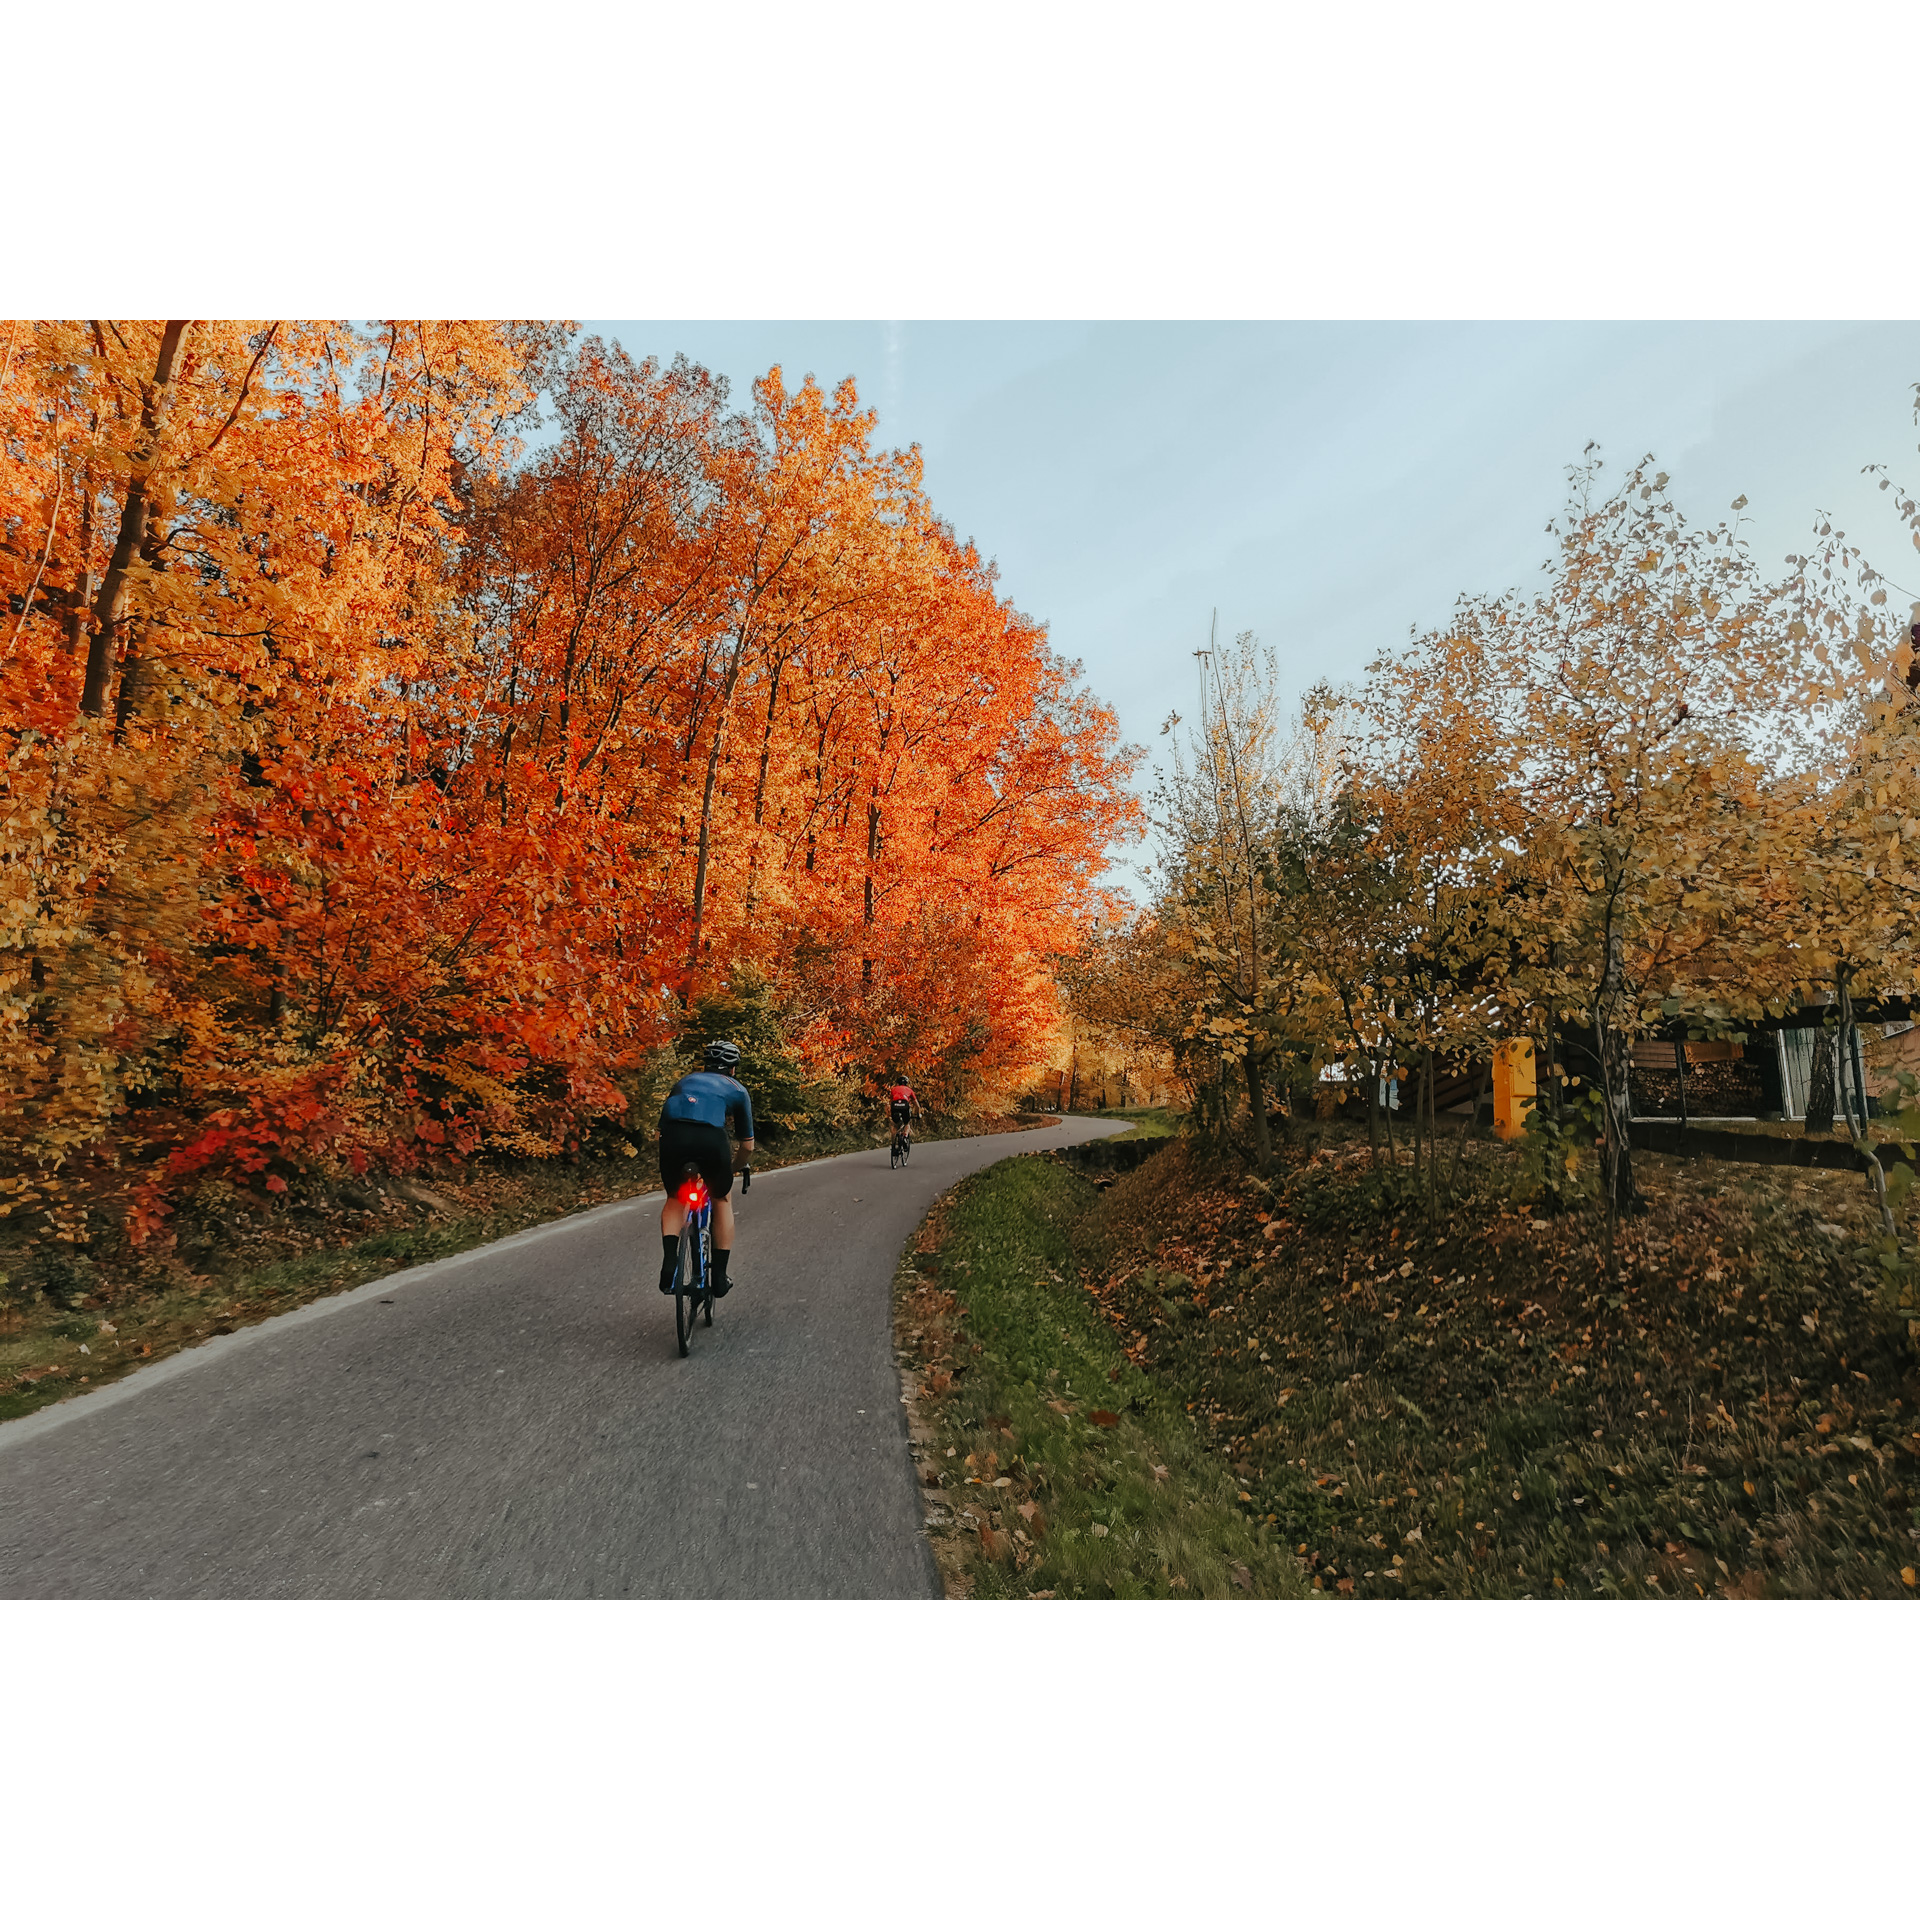 Two cyclists in helmets and cycling clothes riding bicycles along an asphalt road along an alley of orange-red-yellow trees